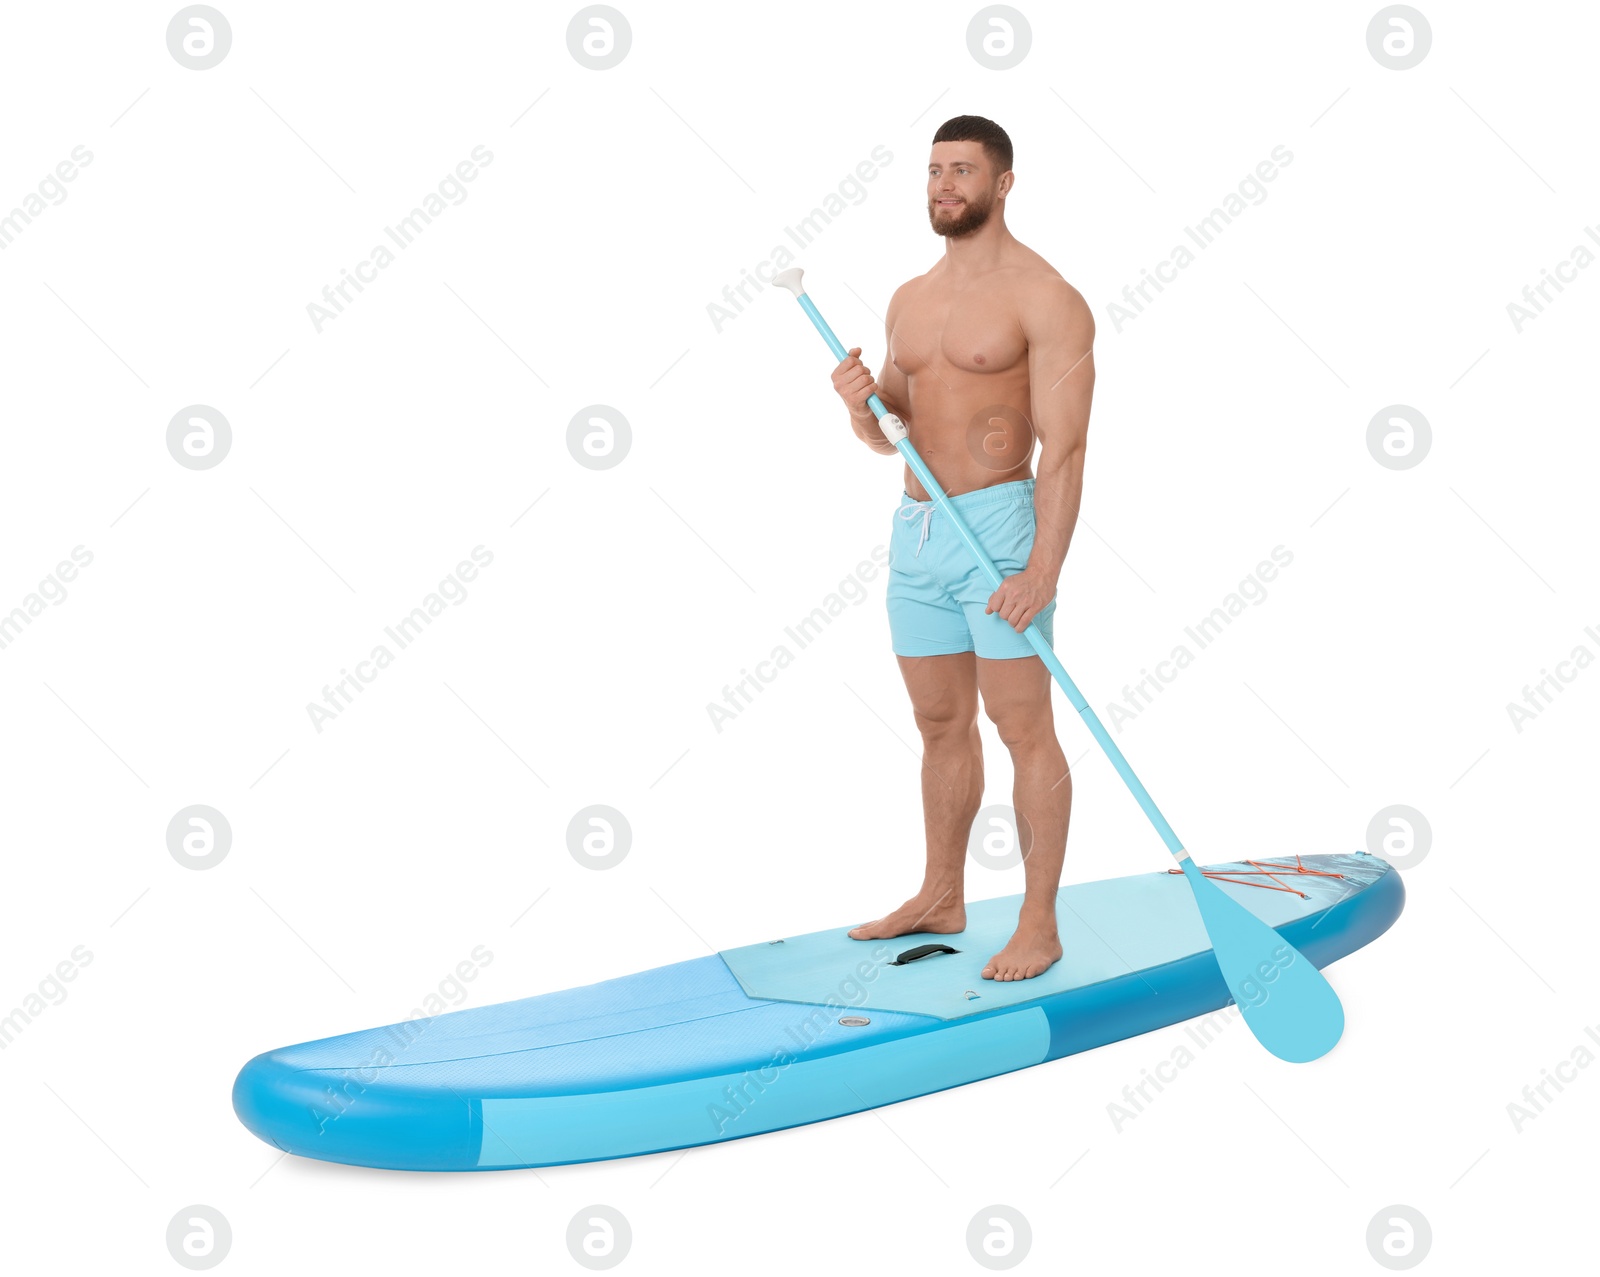 Photo of Handsome man with paddle on blue SUP board against white background